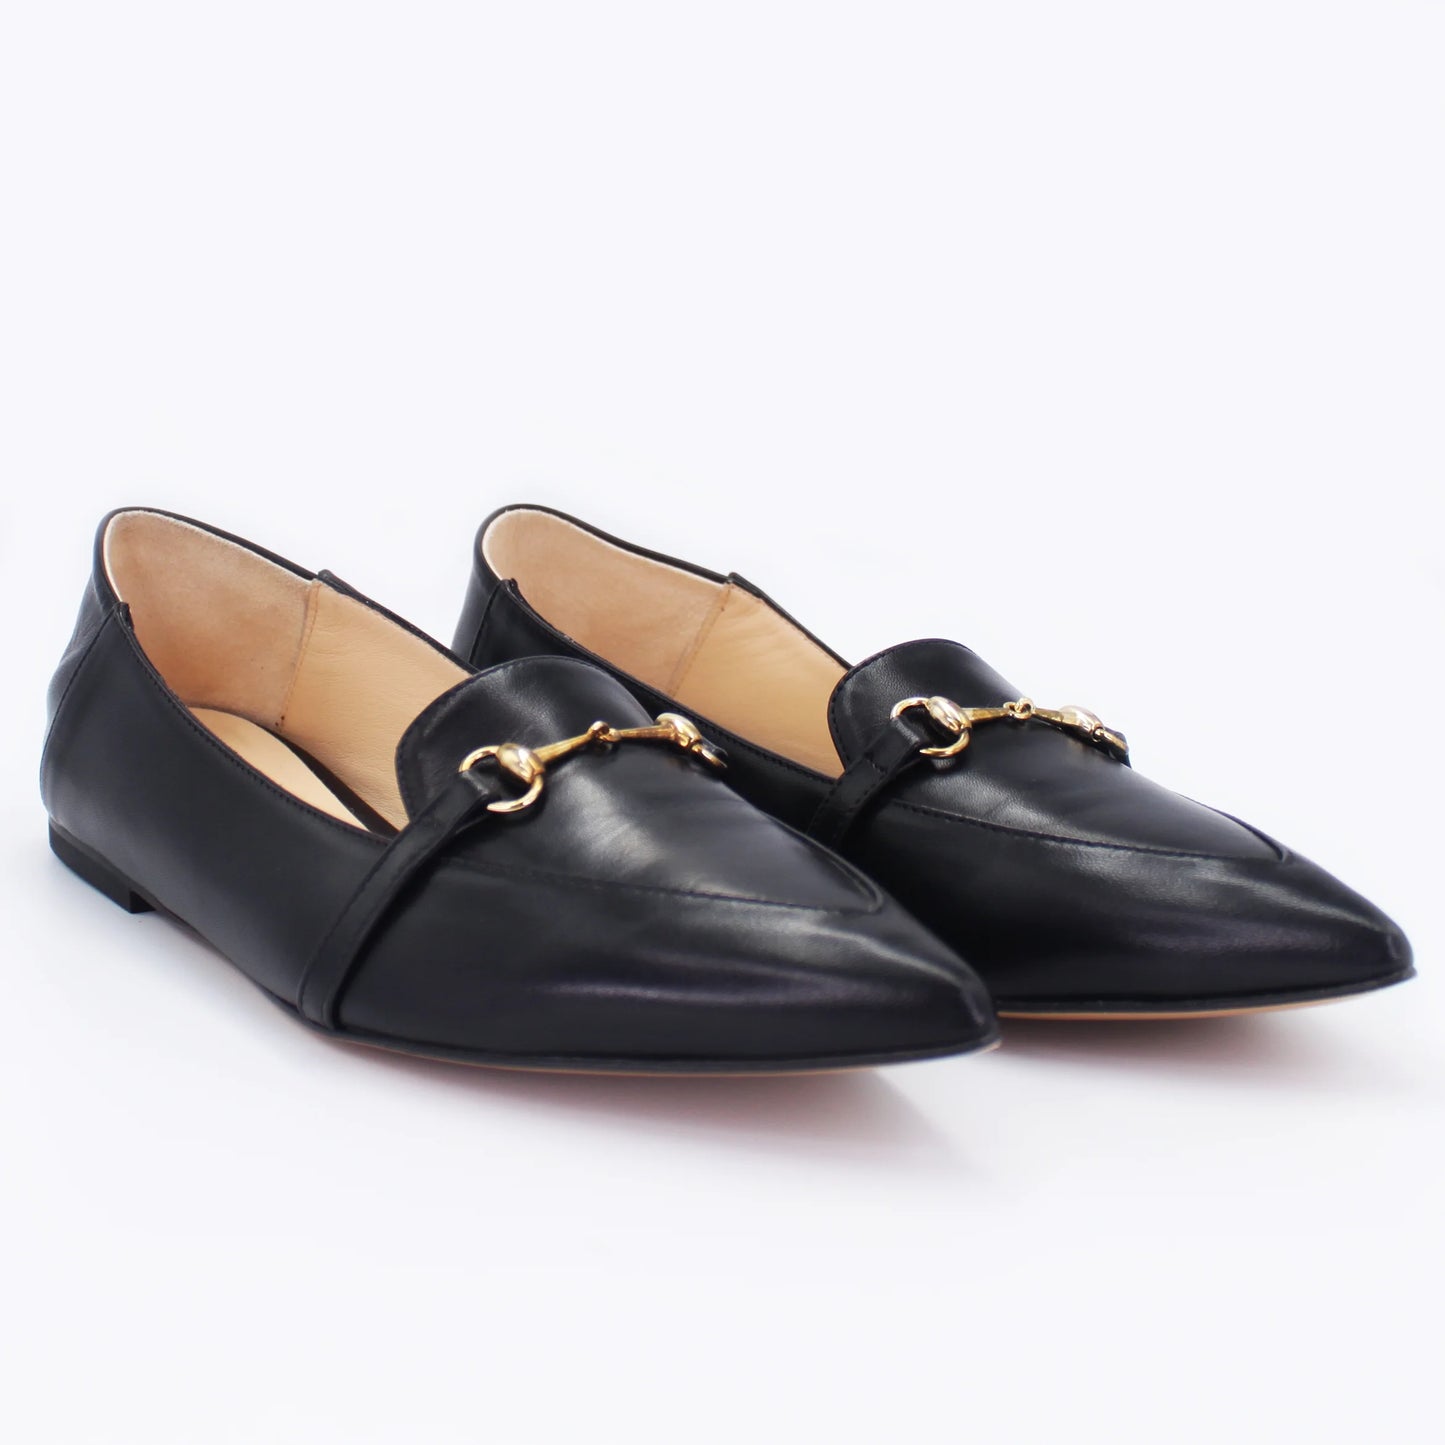 Shop Handmade Italian Leather Moccasin in Black for Women (2215) or browse our range of hand-made Italian moccasins & loafers for women in leather or suede in-store at Aliverti Durban or Cape Town, or shop online. We deliver in South Africa & offer multiple payment plans as well as accept multiple safe & secure payment methods.